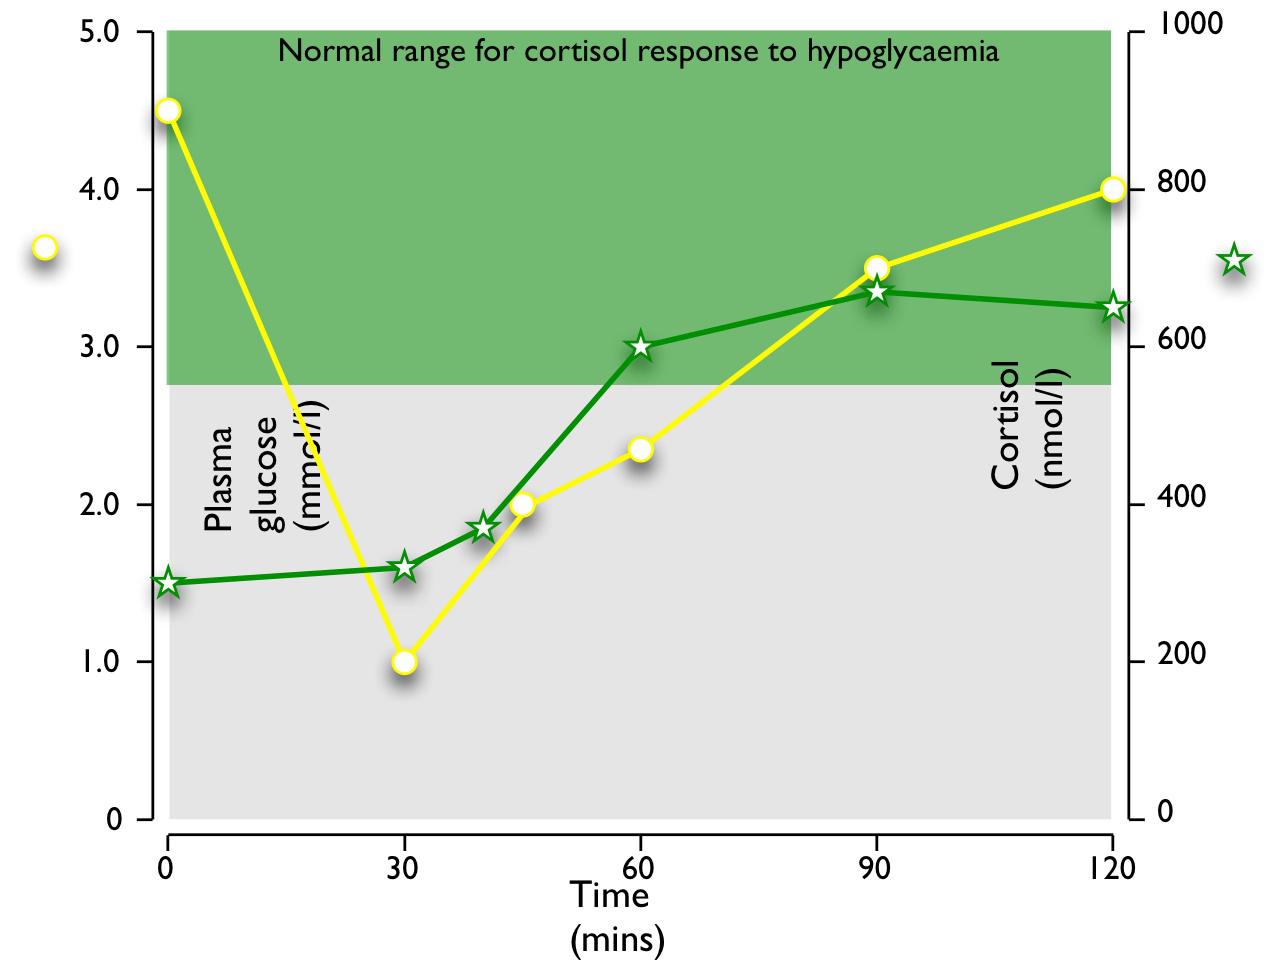 Figure 4: Typical response to hypoglycaemia (≤2.2 mmol/l) induced by 0.15 U/kg Actrapid i.v. in a normal subject. Peak cortisol is ≥550 nmol/l.